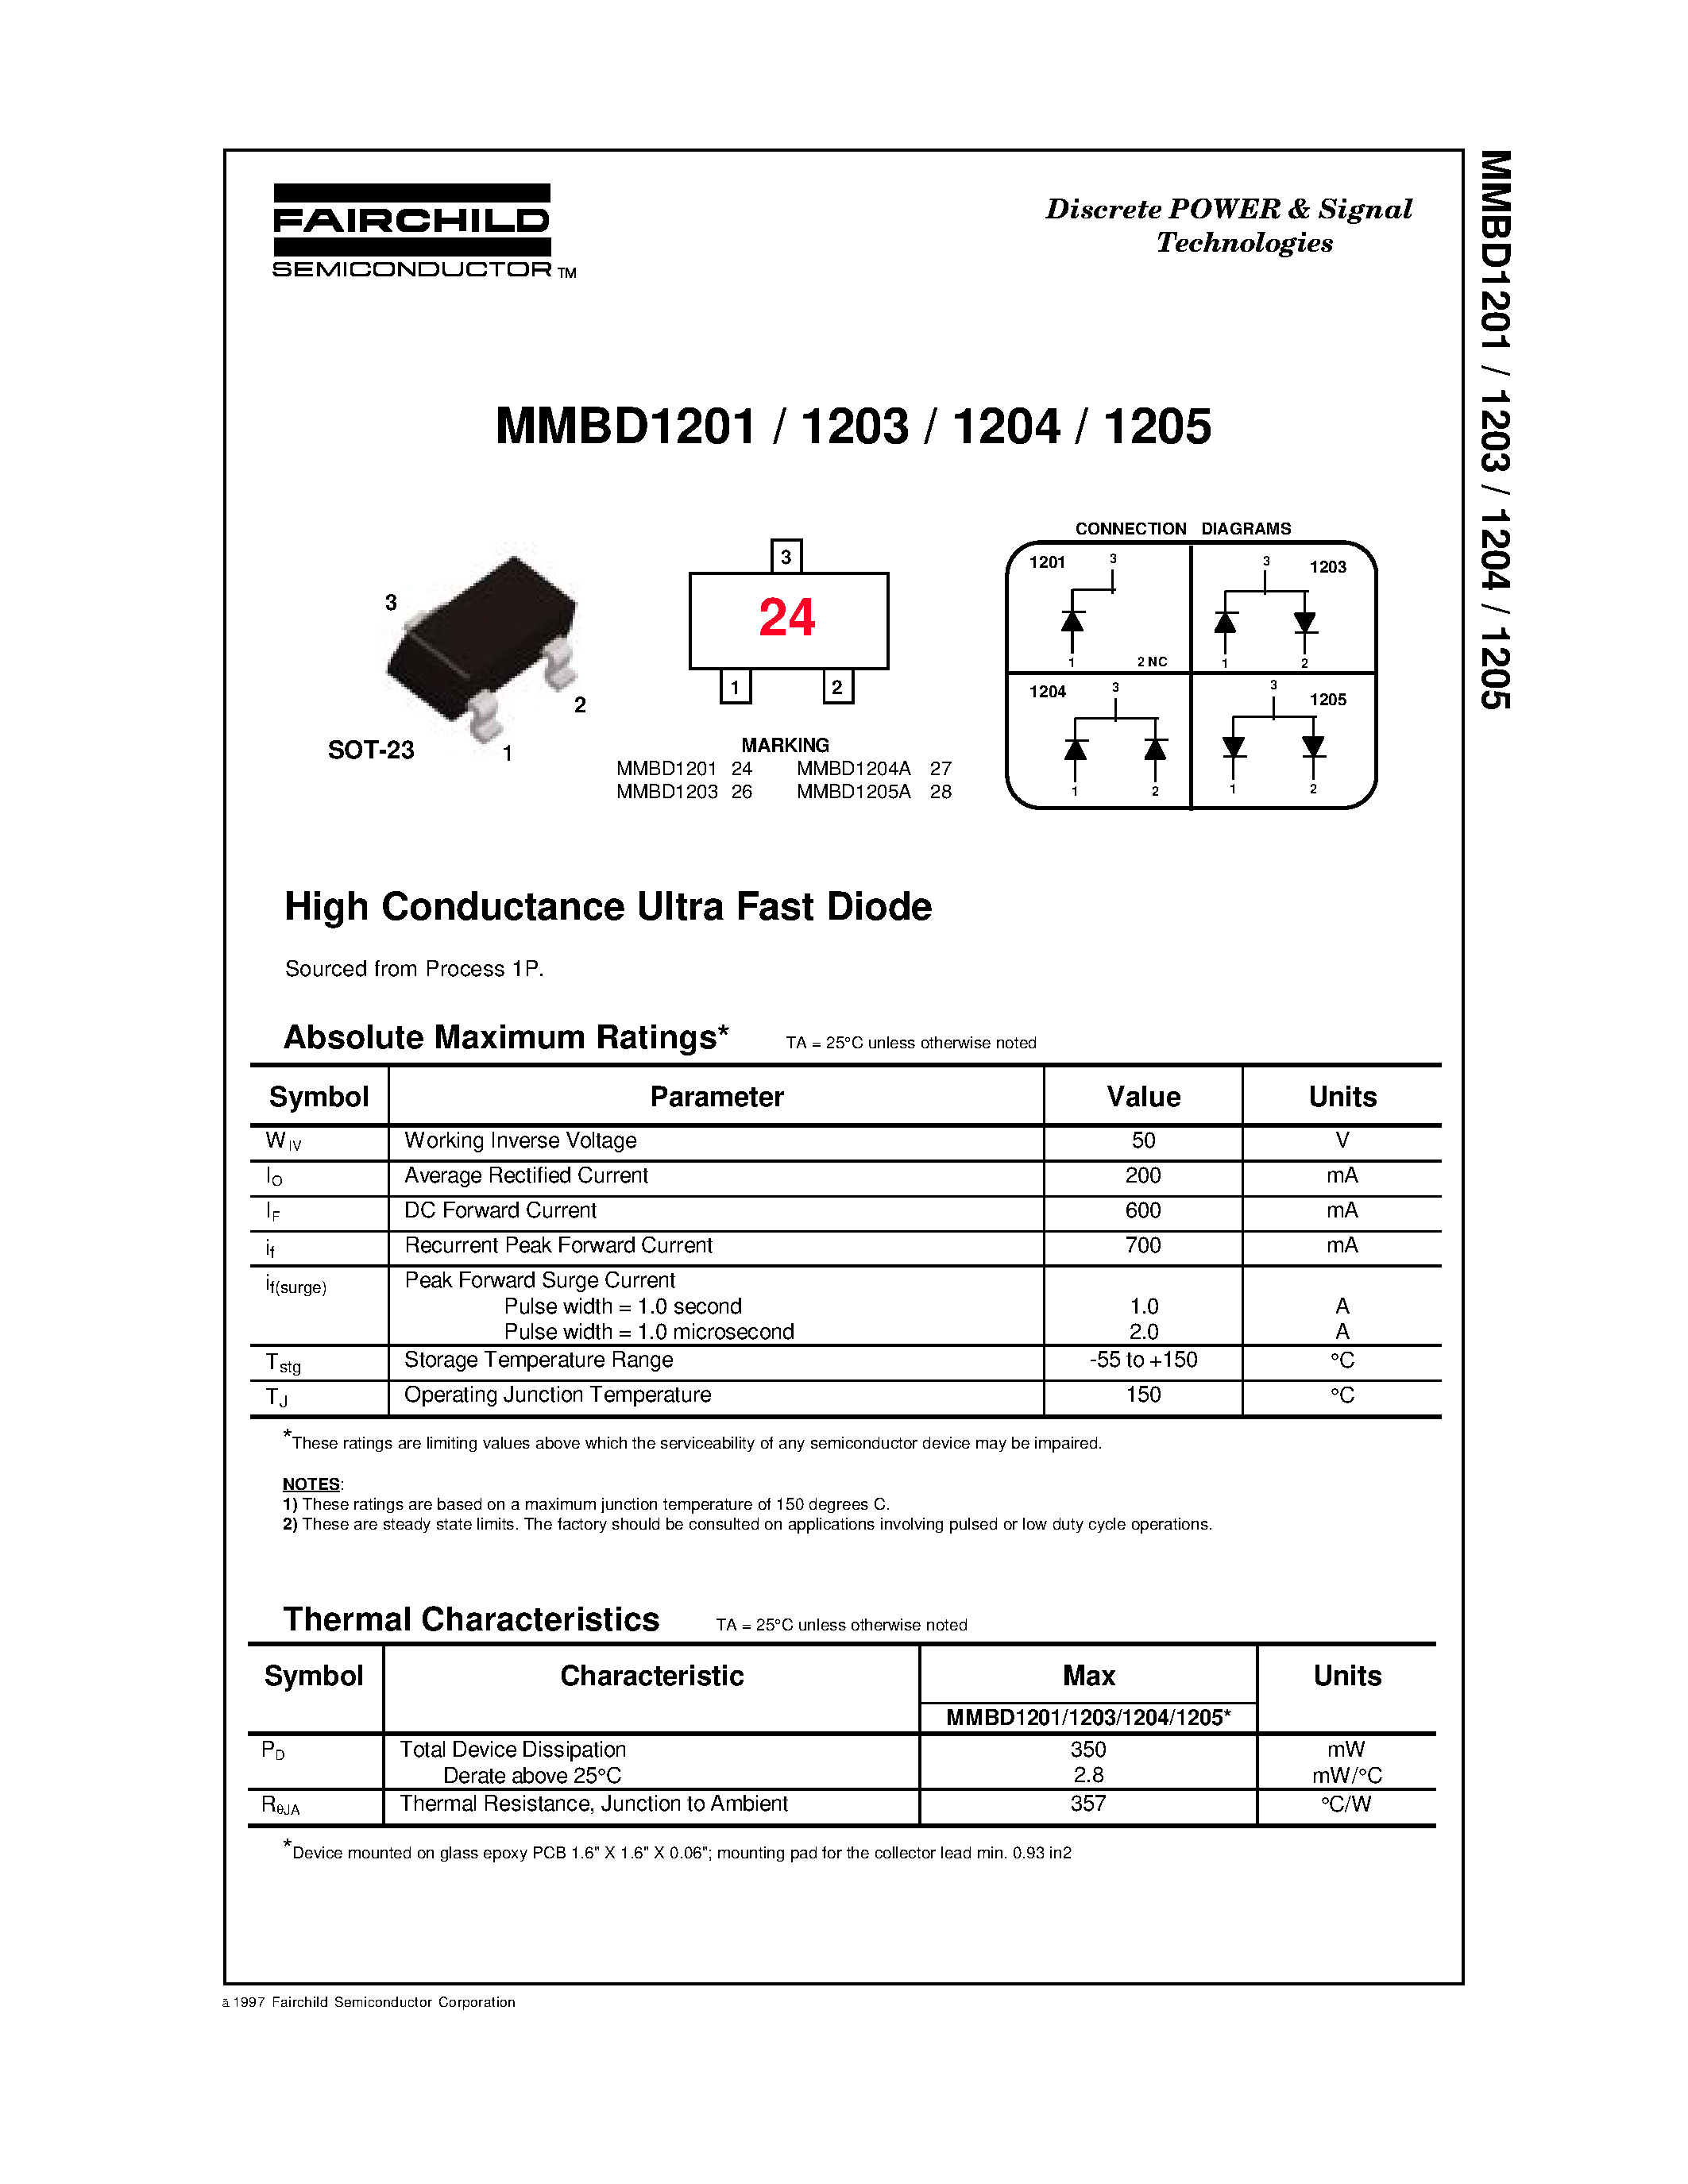 Datasheet MMBD1203 - High Conductance Ultra Fast Diode page 1